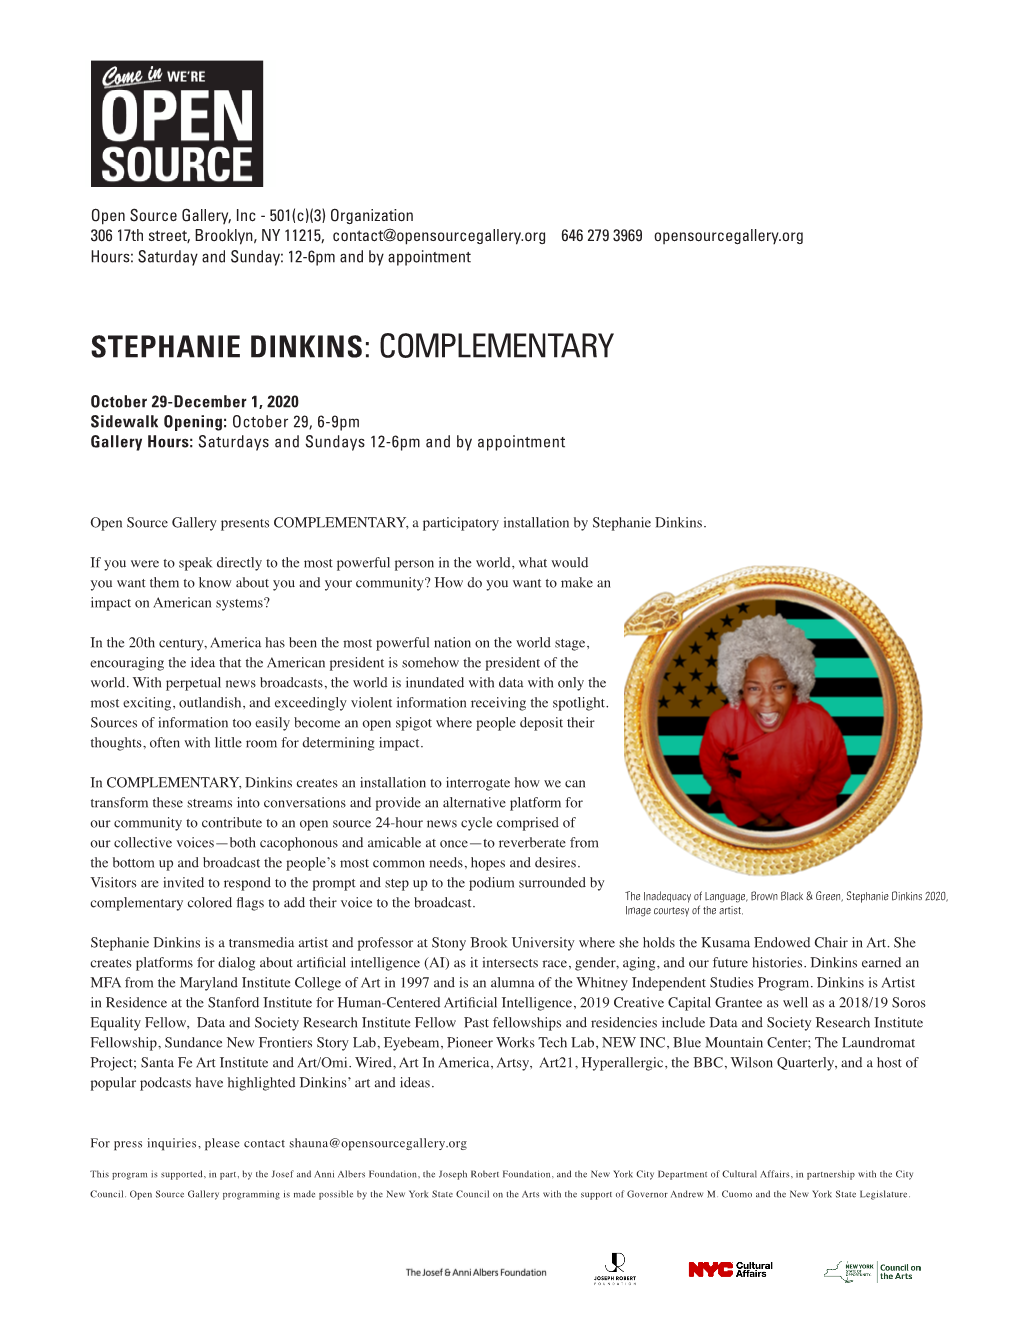 Stephanie Dinkins: Complementary